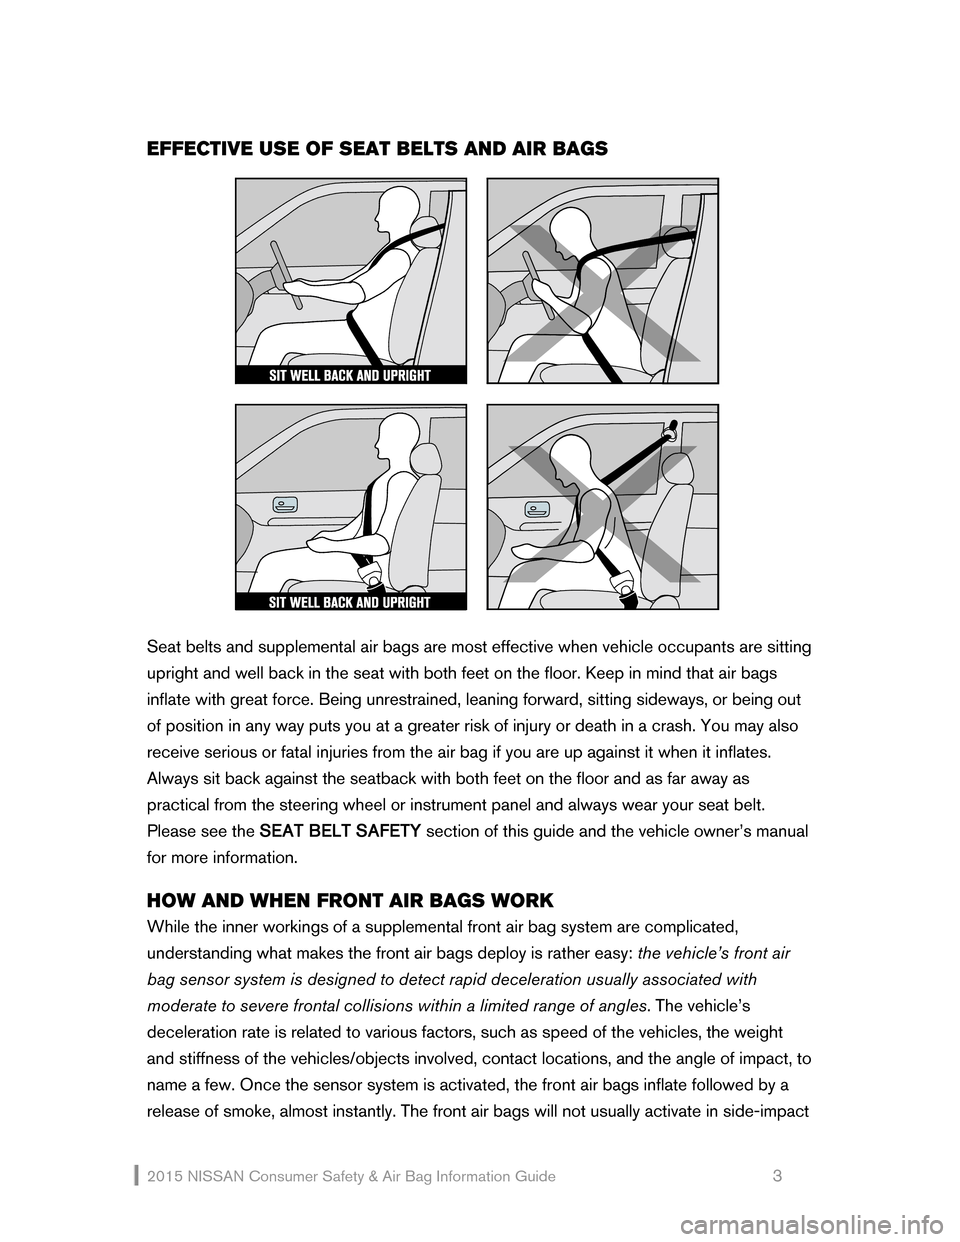 NISSAN XTERRA 2015 N50 / 2.G Consumer Safety Air Bag Information Guide 2015 NI\f\fAN  Consumer \fafety  & Air Bag Information Guide                                                     \b 
EFFE\fTIVE USE OF SEAT BELTS AND AIR BAGS 
 
 
 
\feat belts and supplemental air b